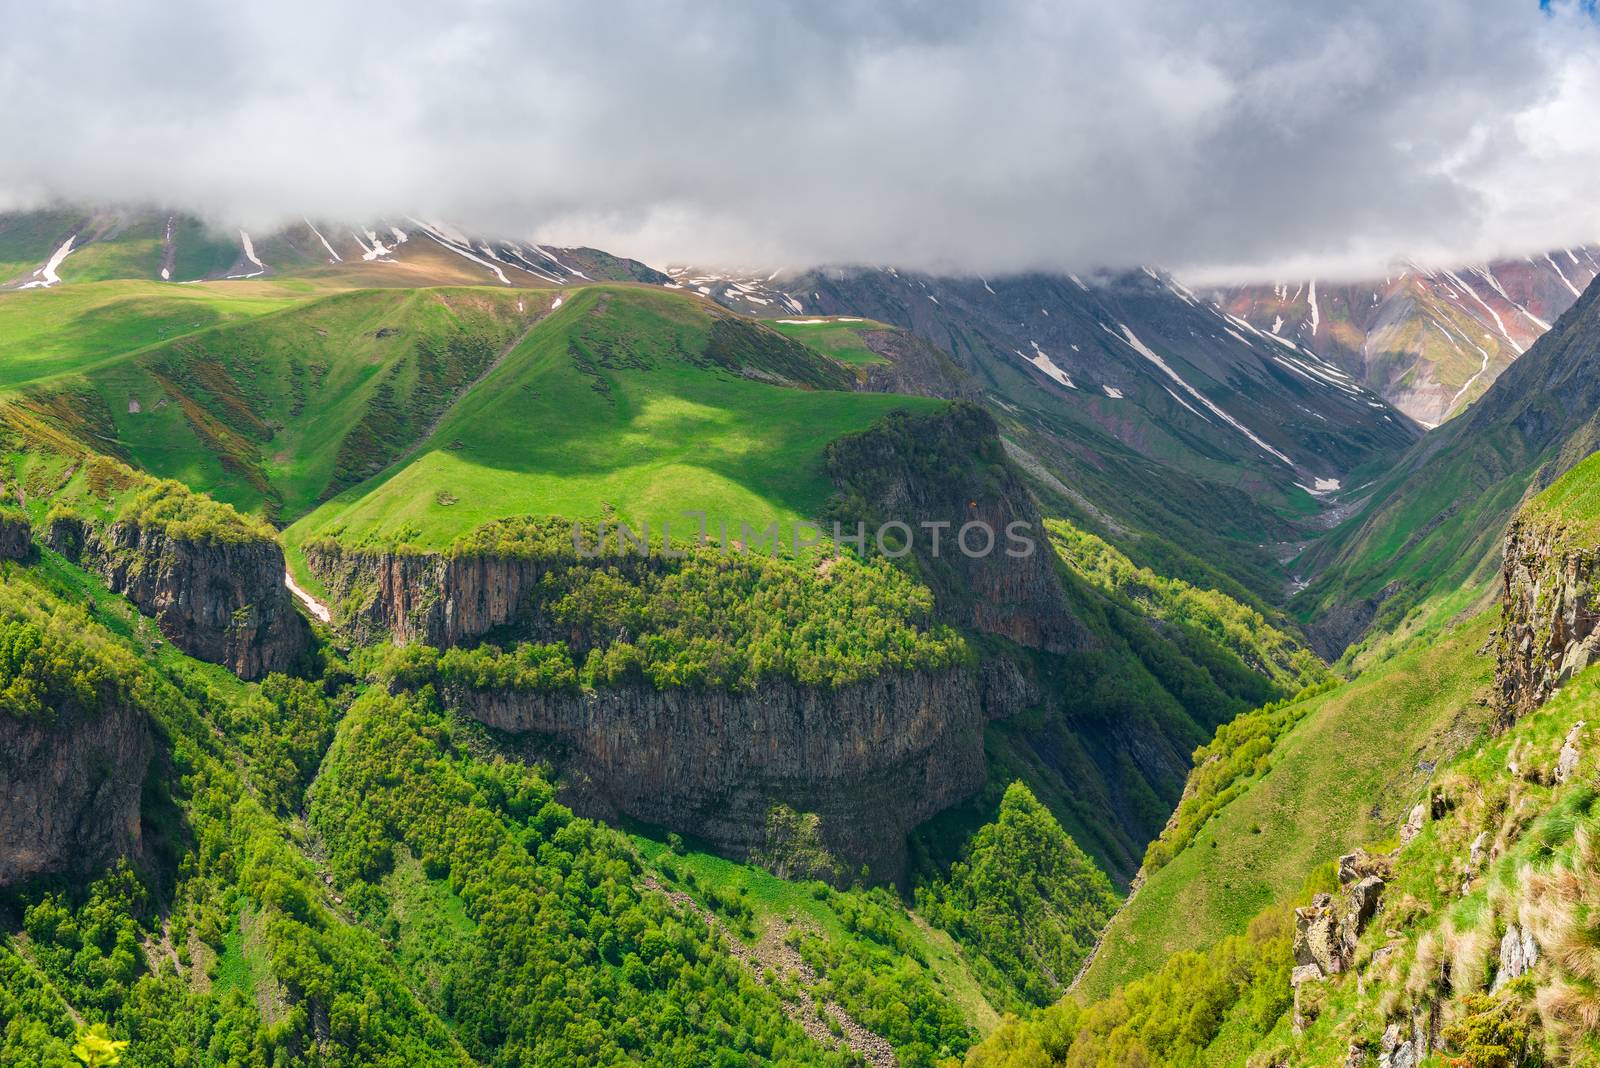 Travel across Georgia, picturesque high mountains and gorges, a by kosmsos111